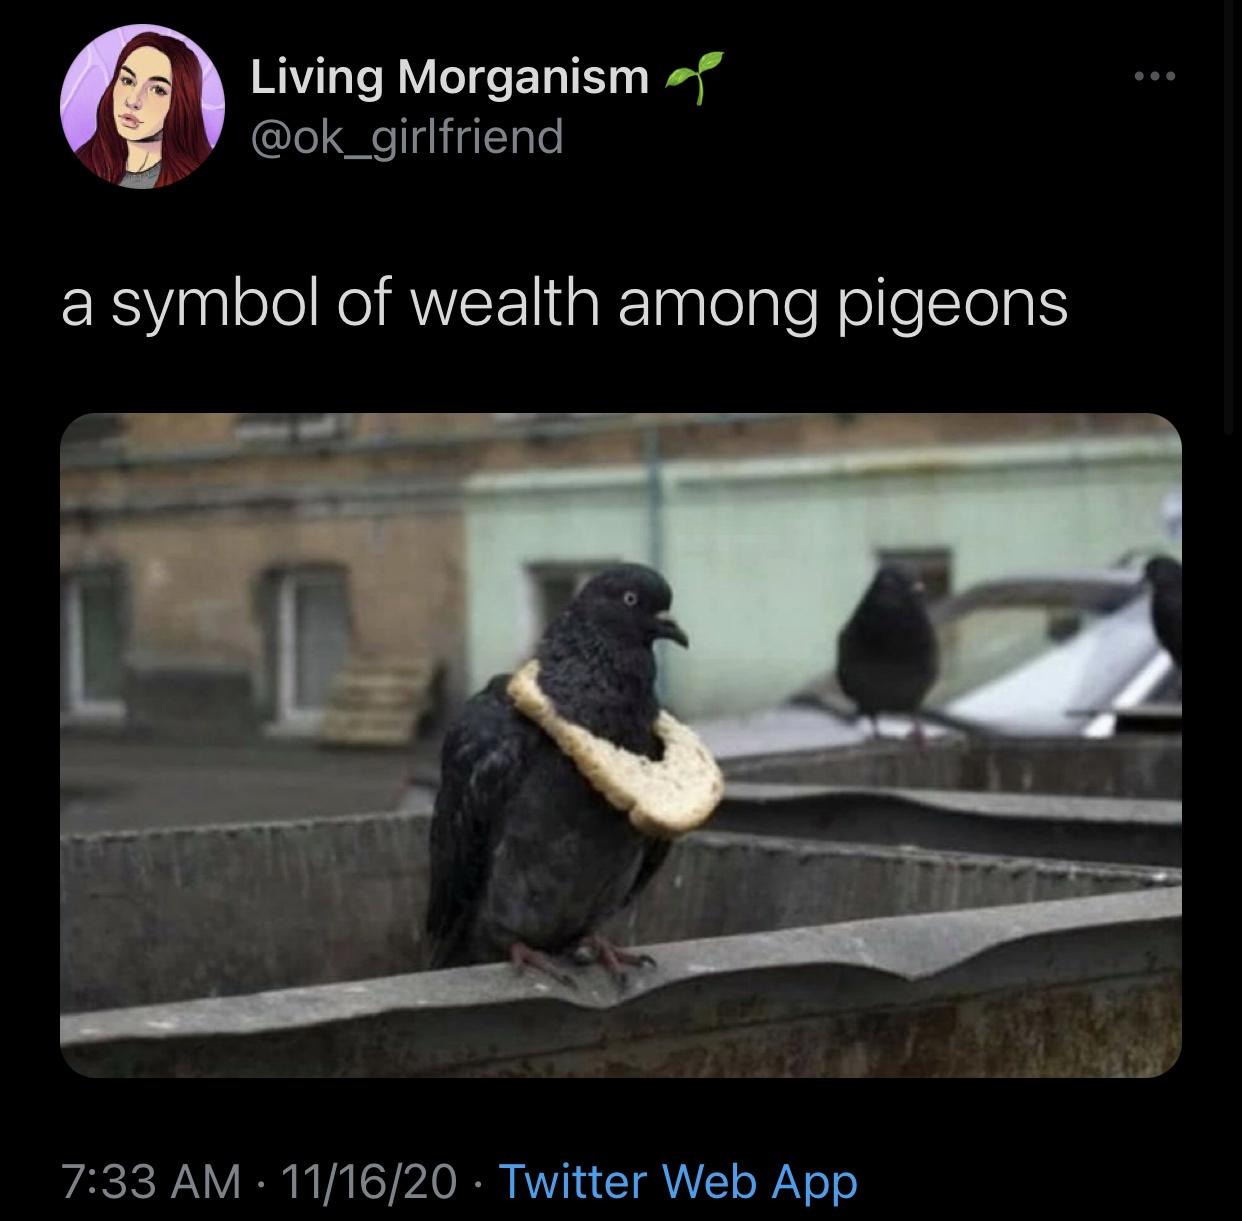 pigeon with bread necklace meme - Living Morganisma a symbol of wealth among pigeons 111620 Twitter Web App